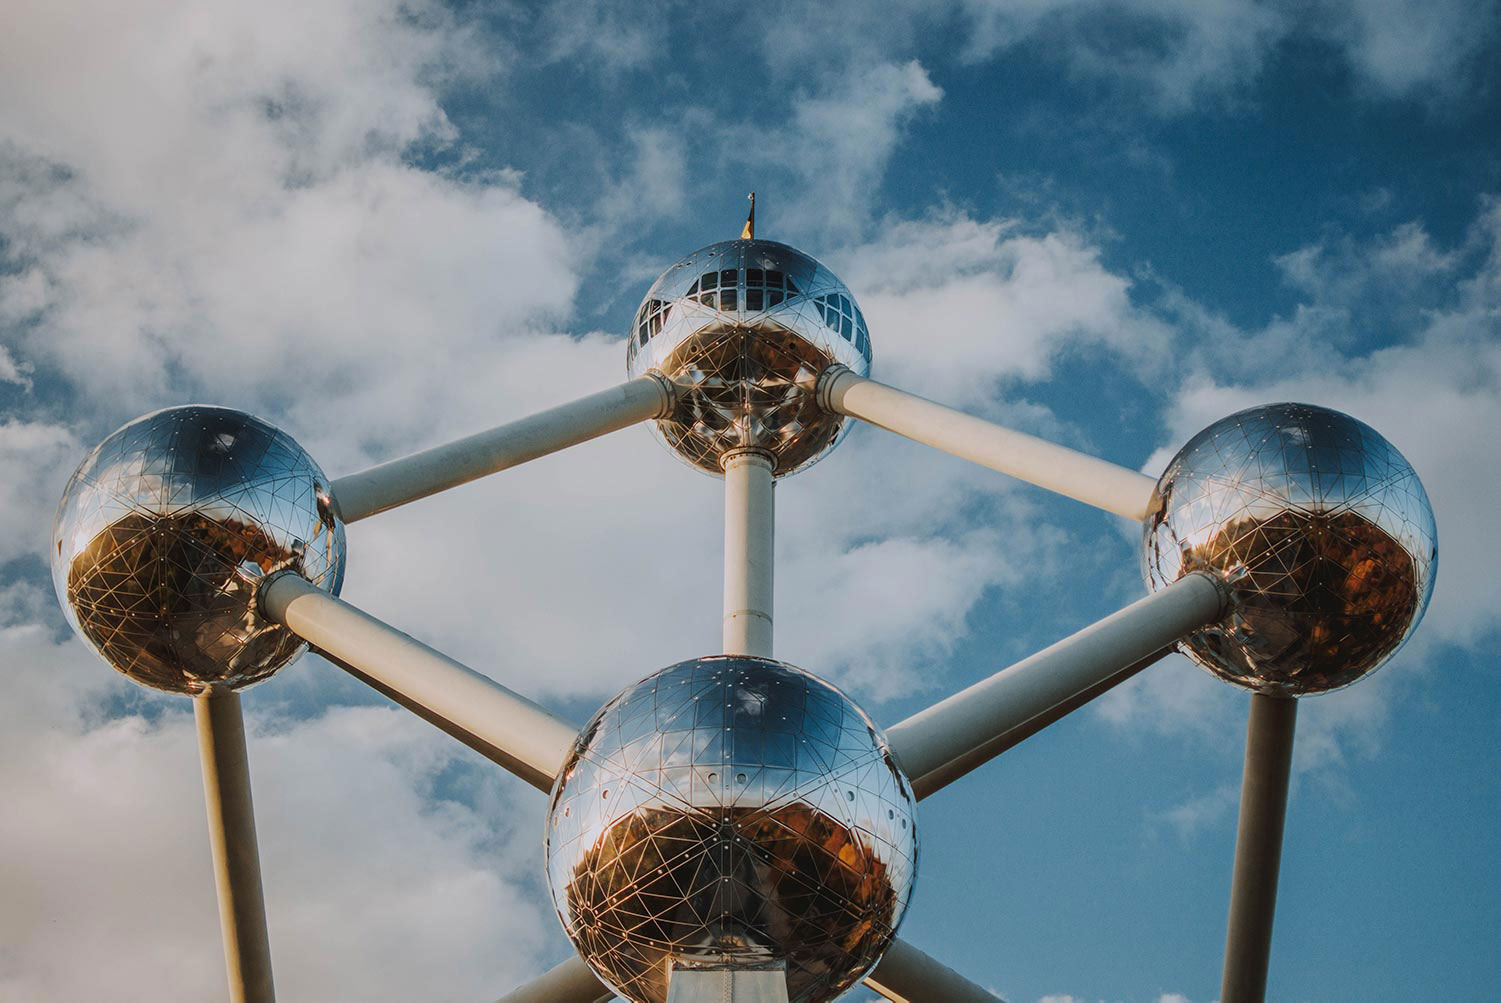 How to visit the Atomium - Complete Guide